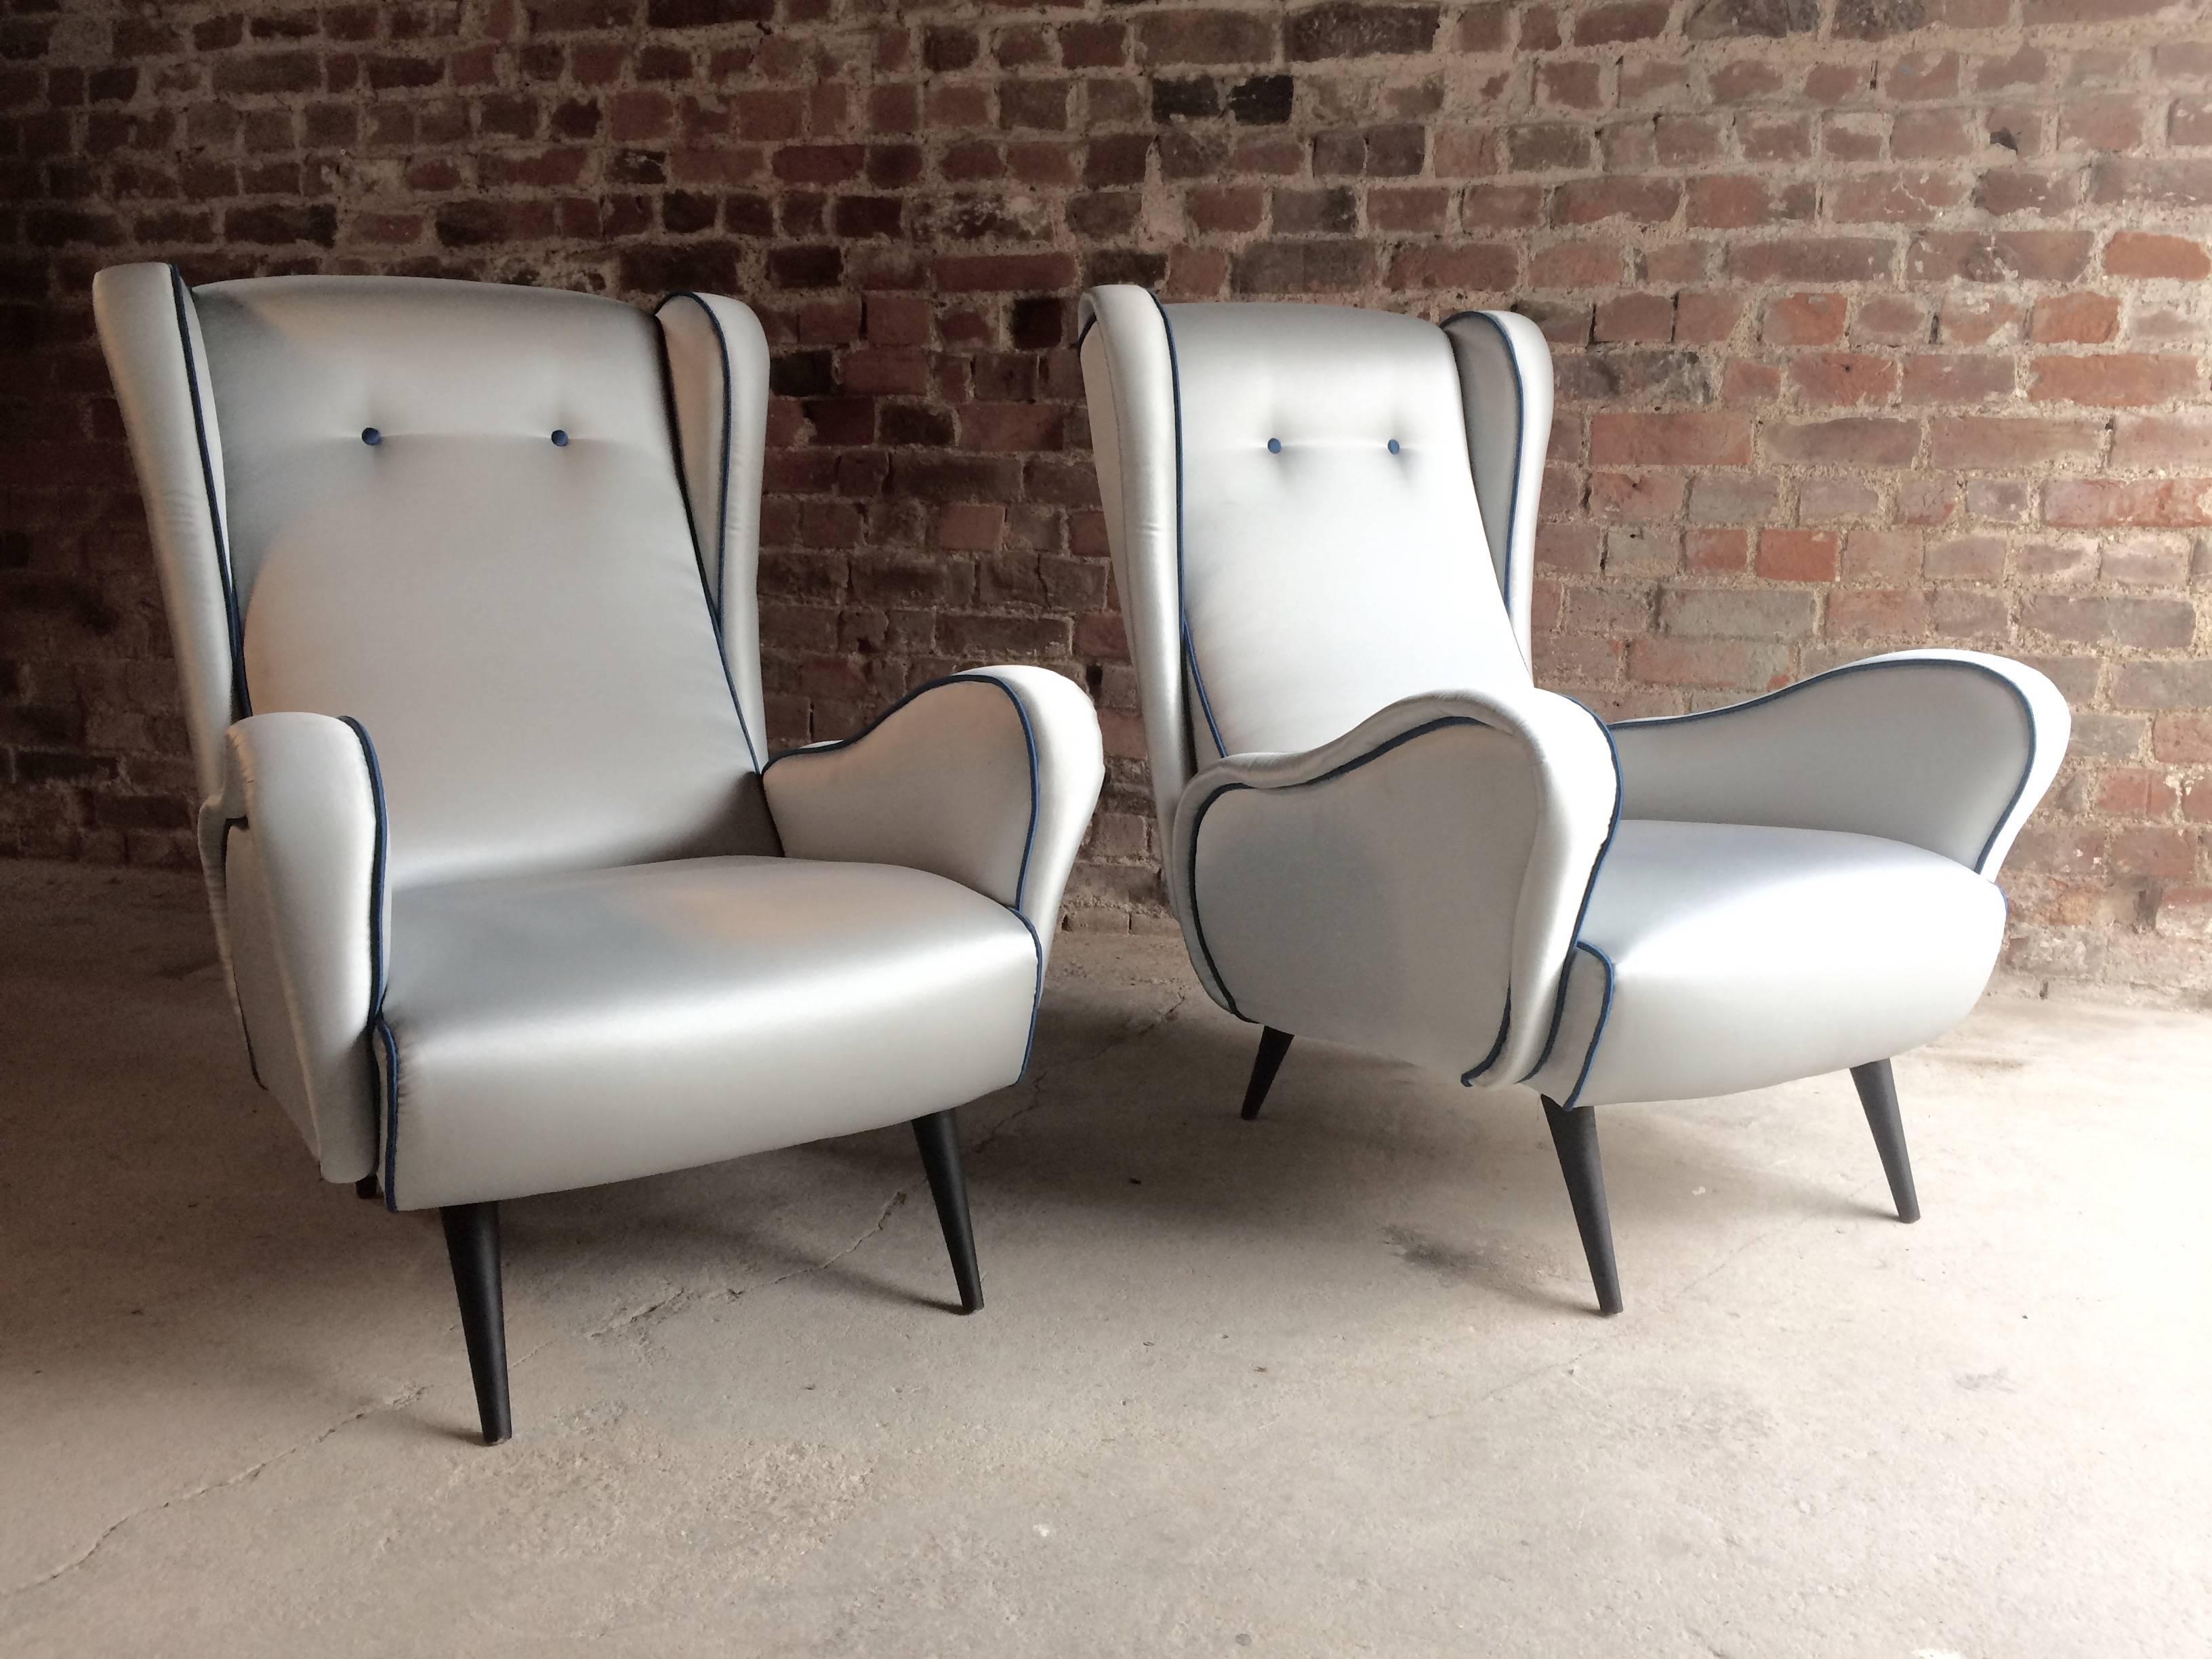 Stunning midcentury Italian design armchairs, 1950s

A fabulous original vintage pair of 1950s Italian armchairs, in blue, with electric blue piping, on black ebonized tapering wood legs, wonderful 1950s iconic design lines, looks